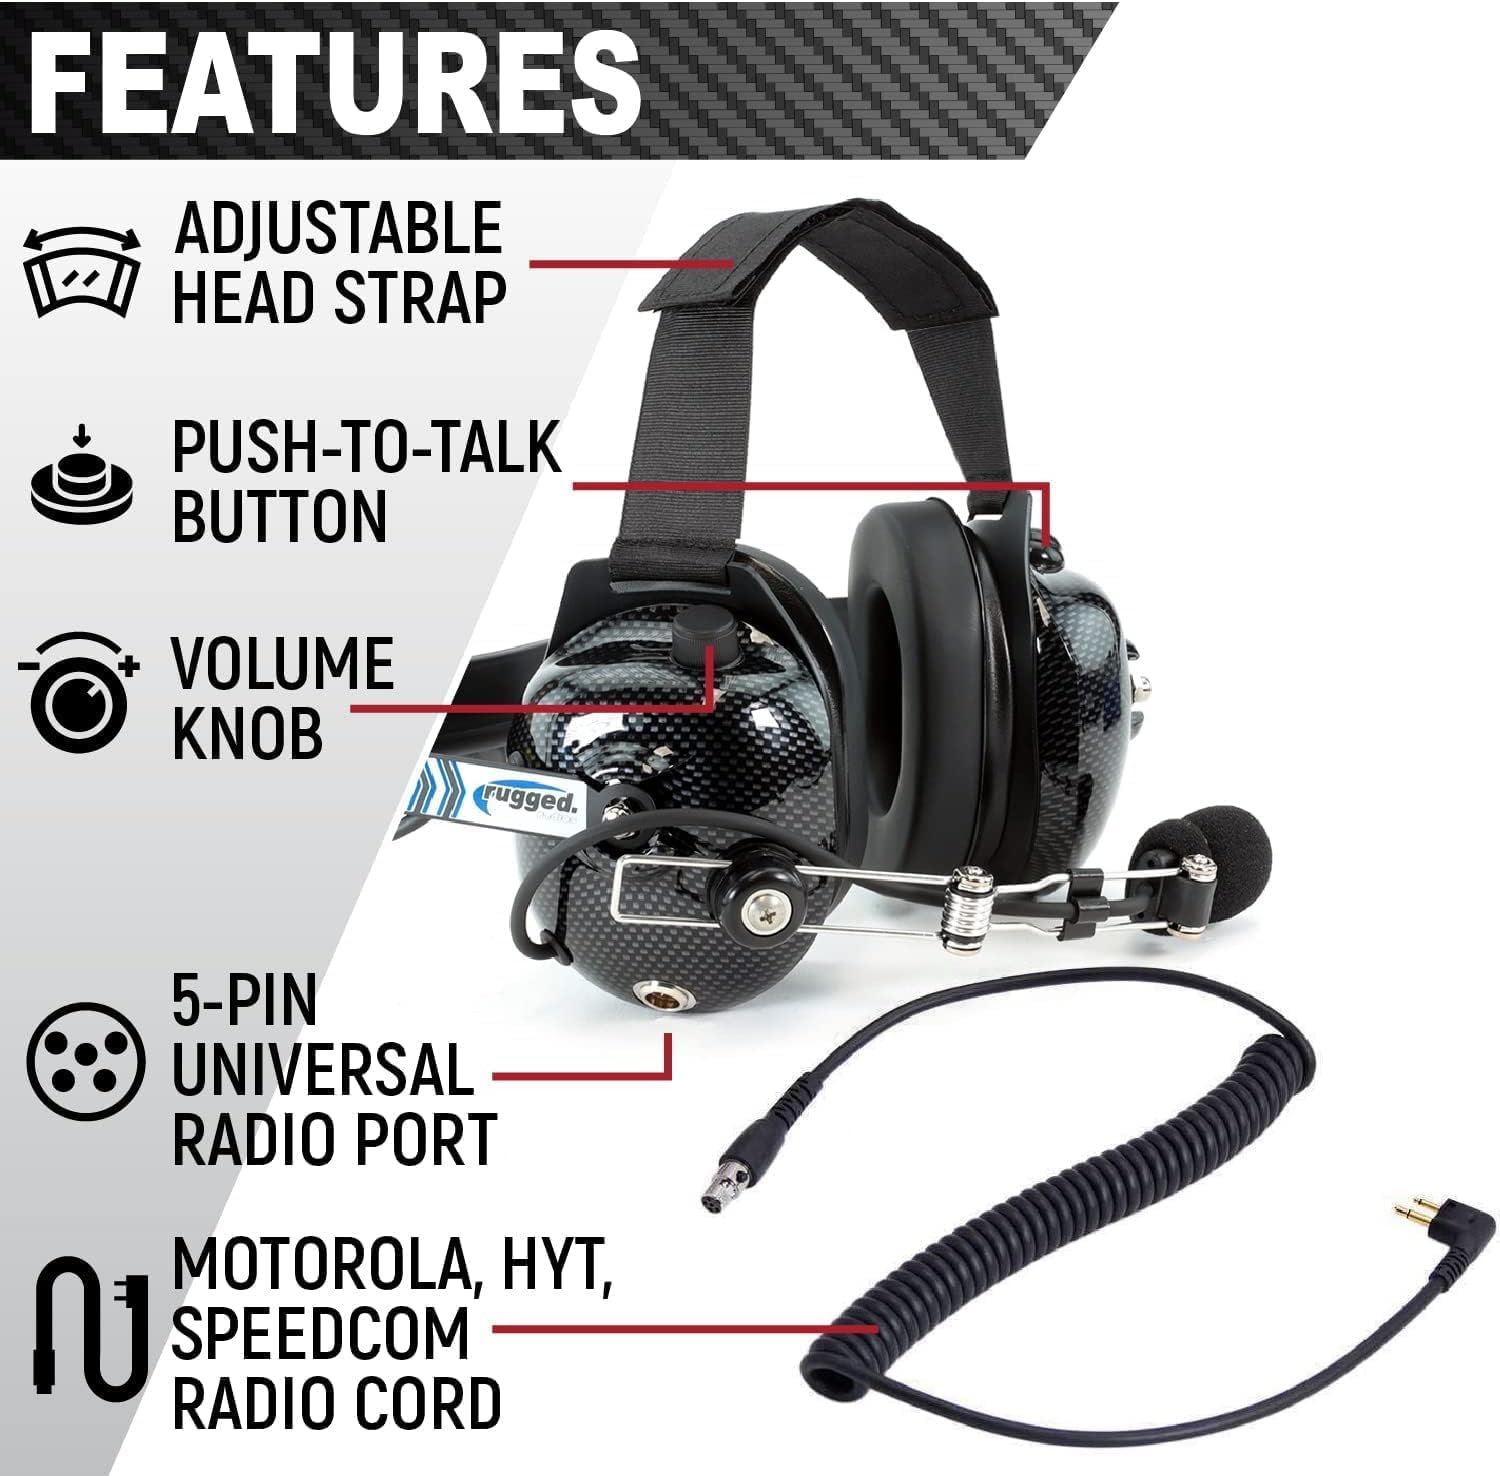 Rugged Behind The Head Headset and Adaptor Cable for Racing Radios Electronics Motorola CP200 – Features Cable to Connect to Two Way Handheld Radio Noise Reduction Volume Control Knob 3.5mm Input Jack